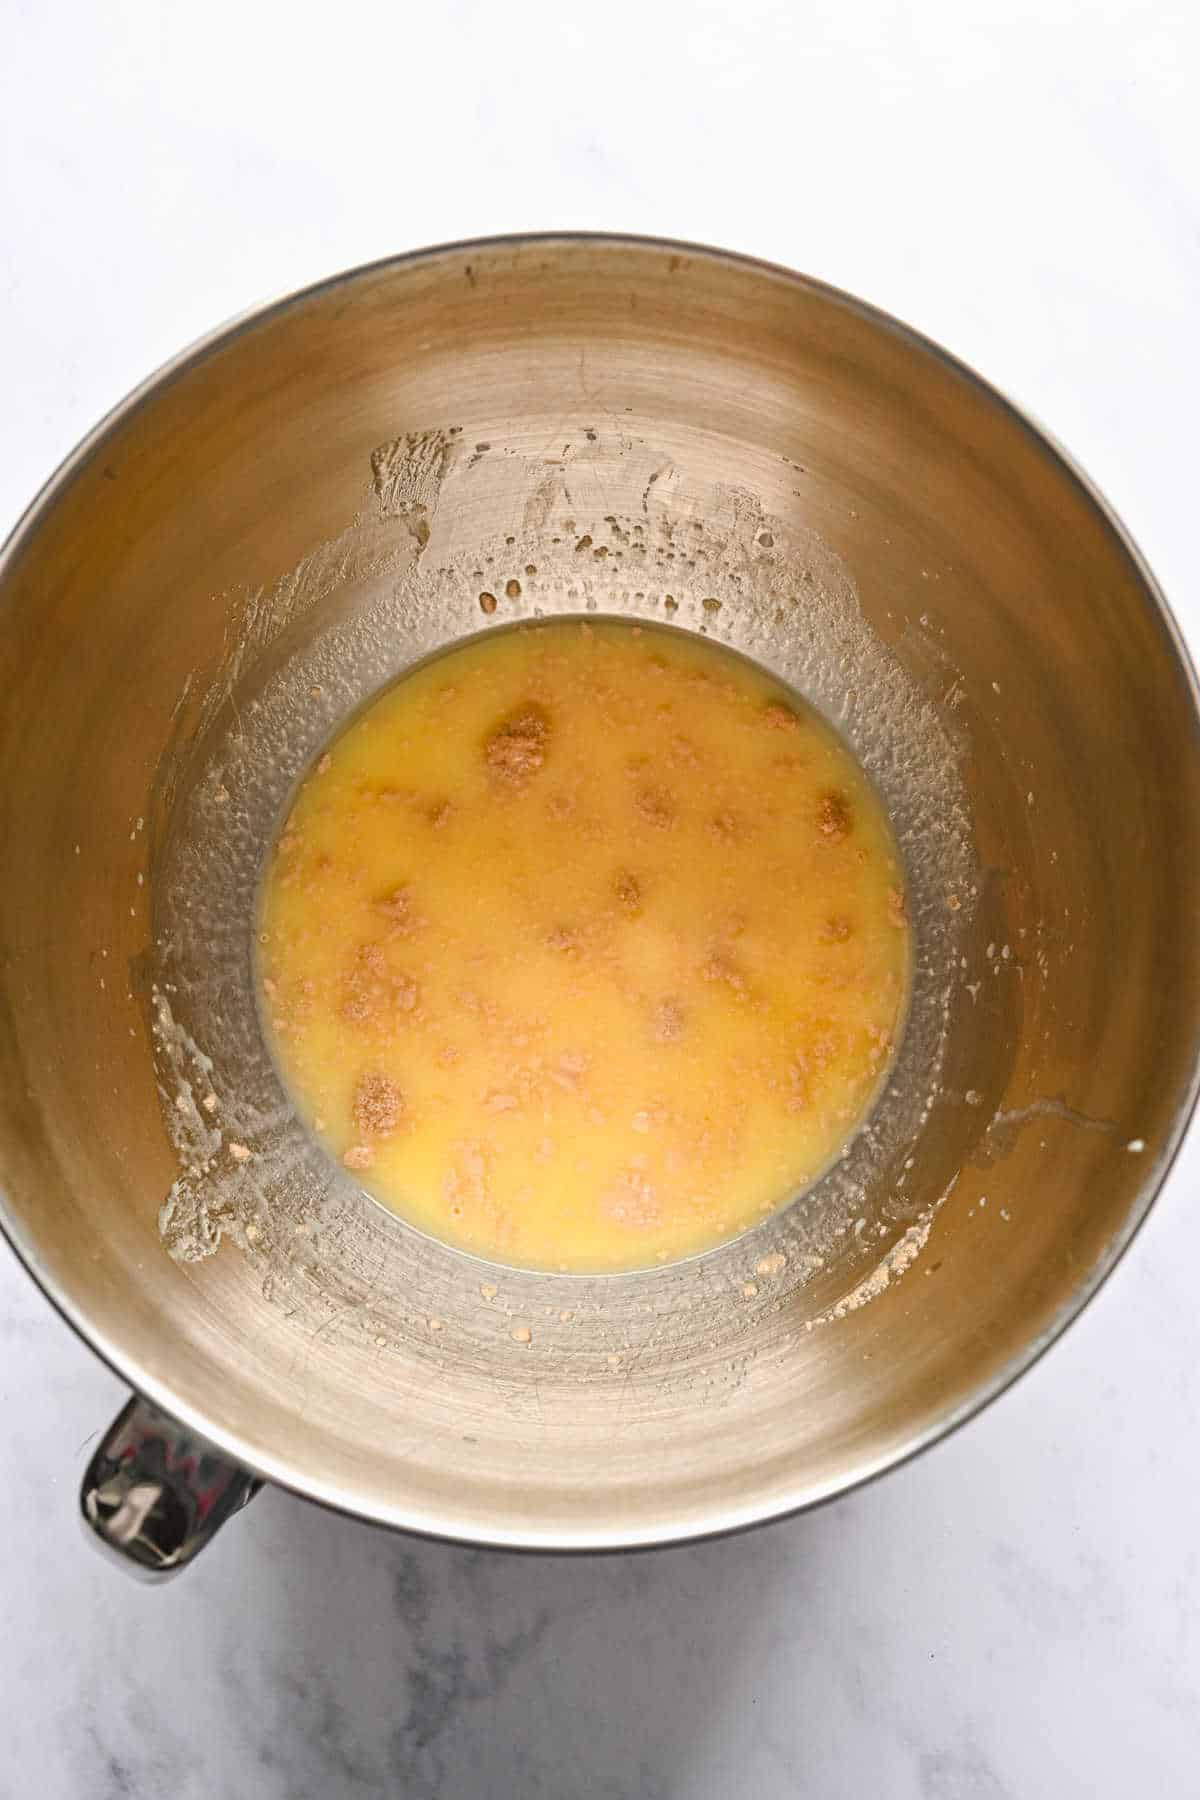 Yeast and butter mixture in a silver mixing bowl. 